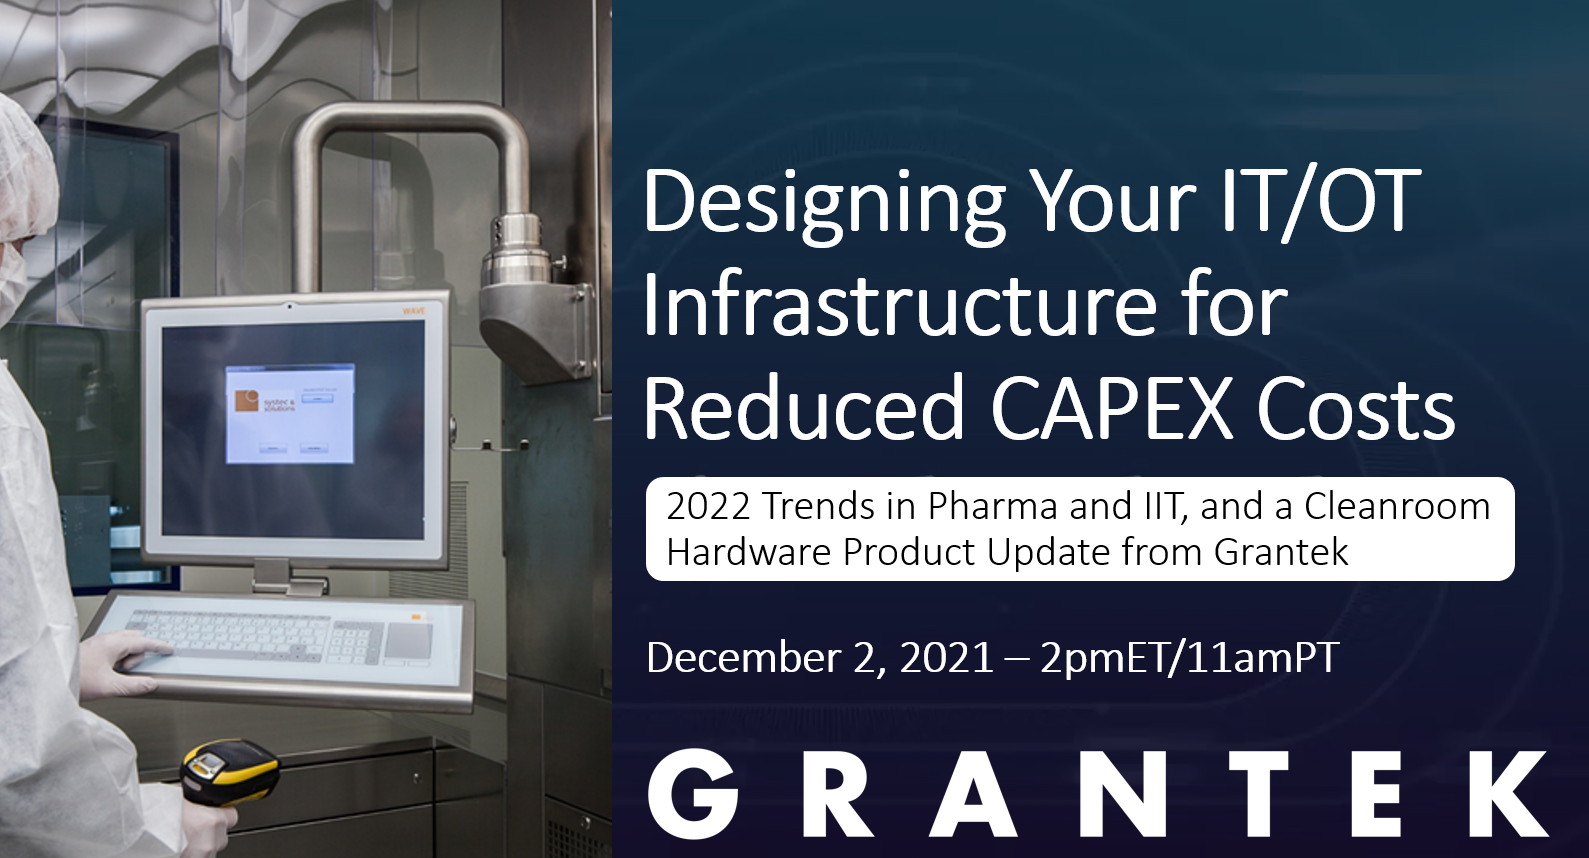 Designing Your IT/OT Infrastructure for Reduced CAPEX Costs